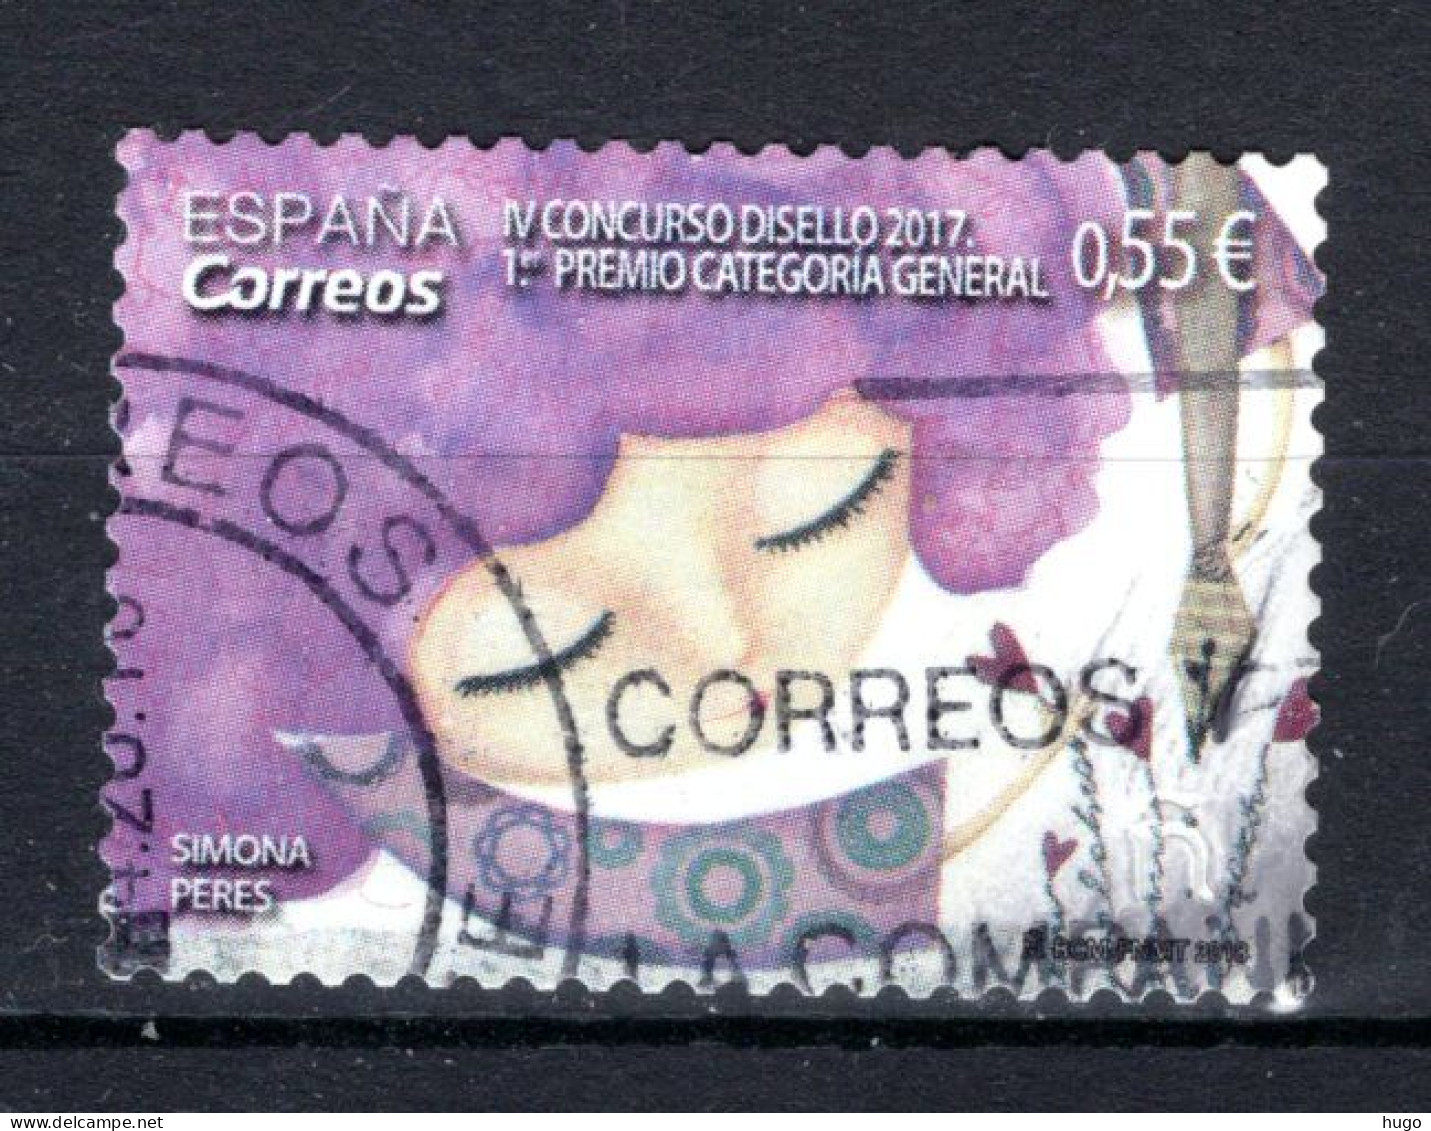 SPANJE Yt. 4935° Gestempeld 2018 - Used Stamps